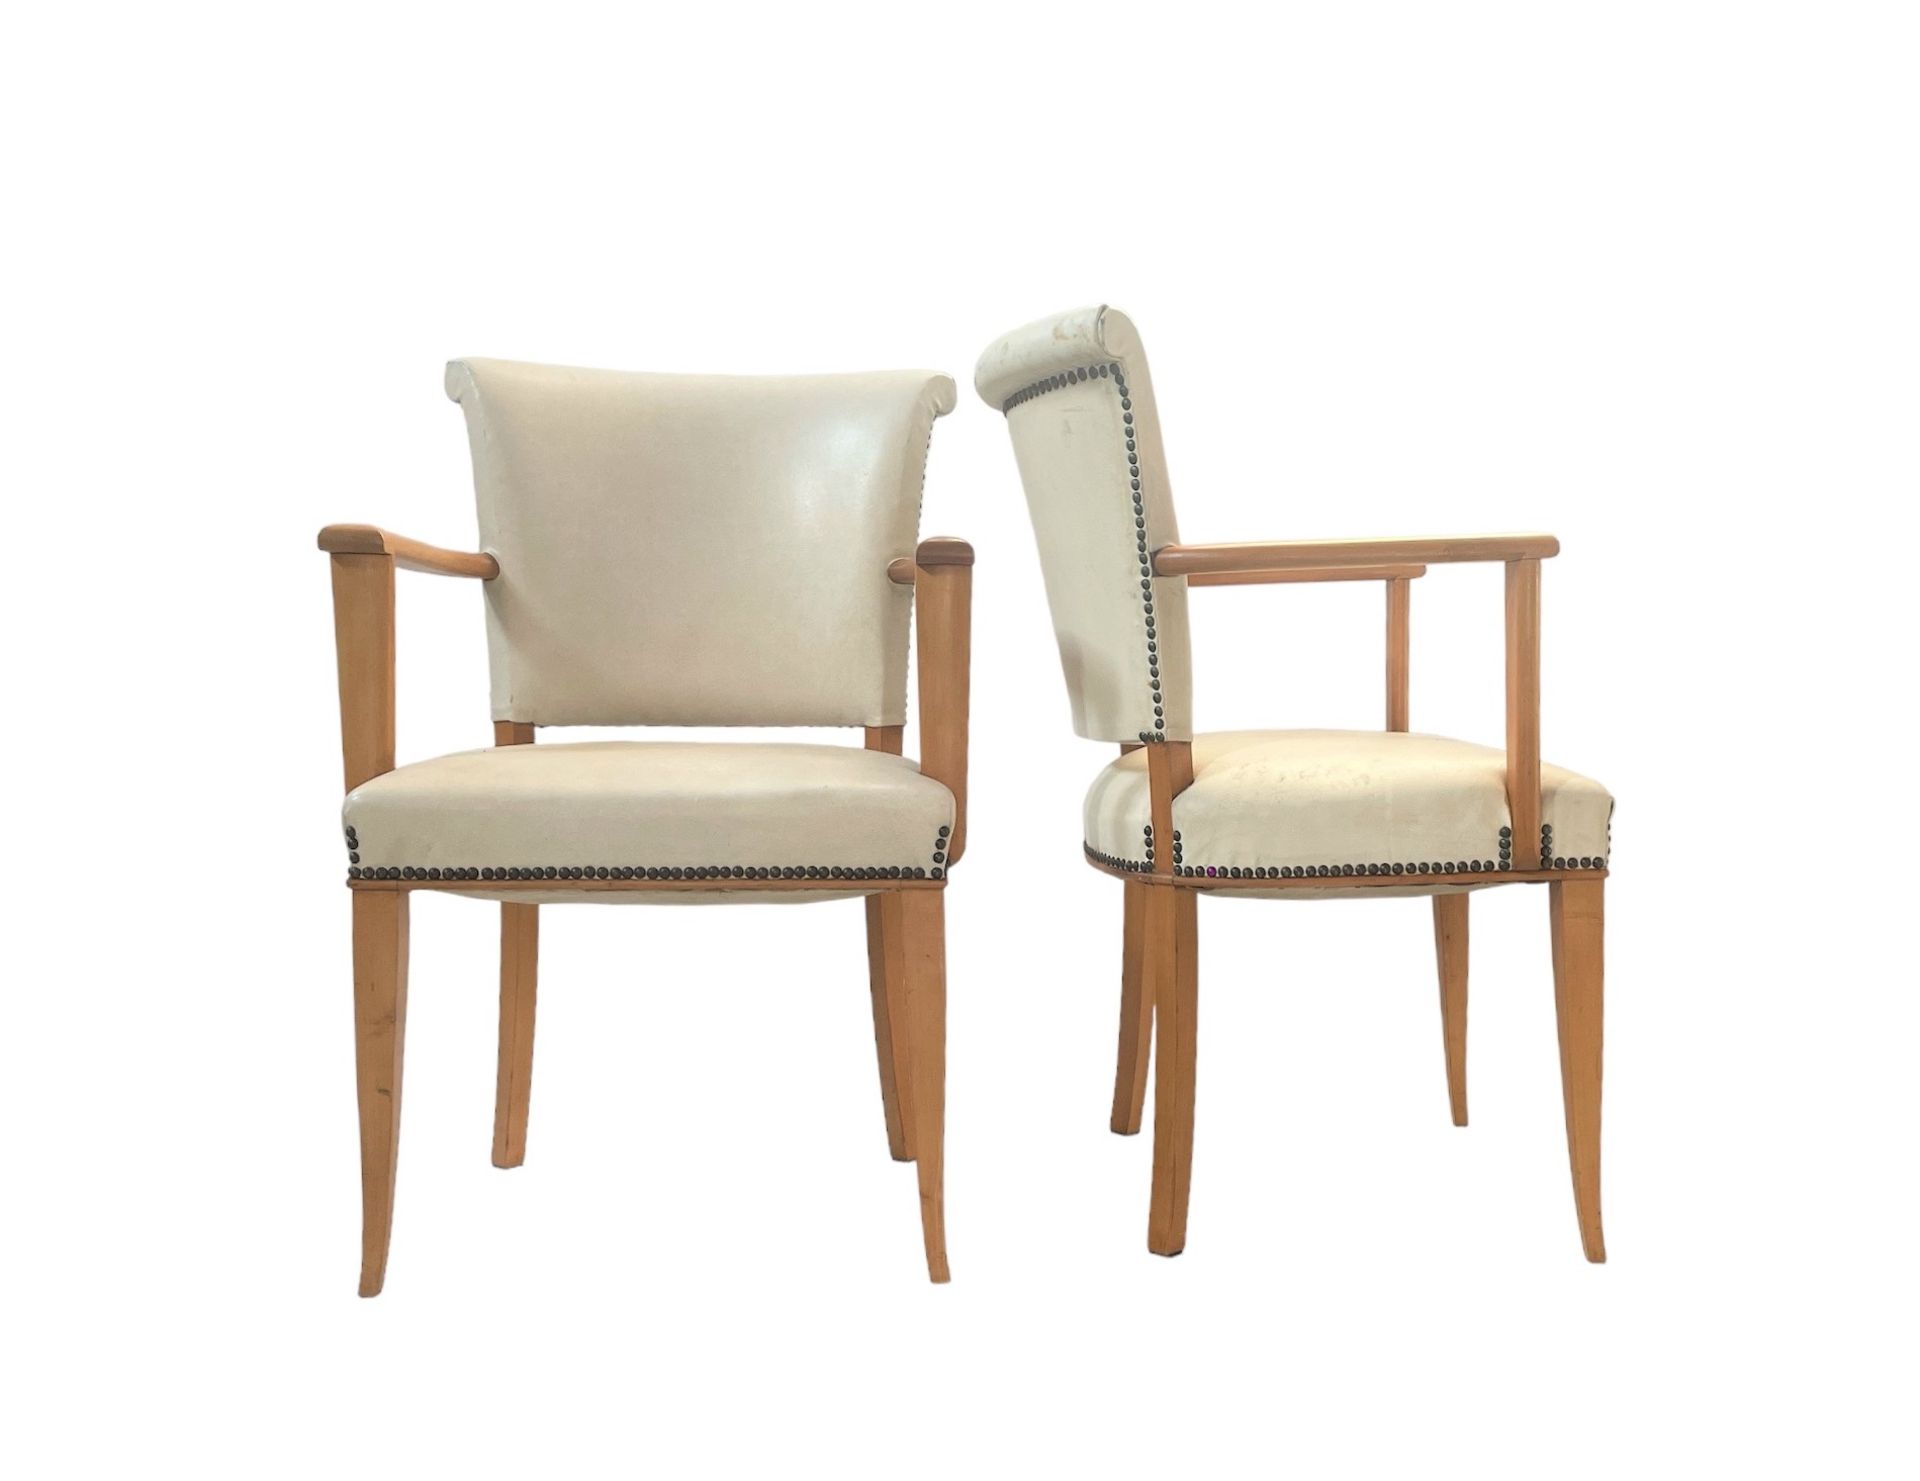 (2) Pair of armchairs in sycamore wood in the style of Art Deco in the taste of Andre Arbus - Image 2 of 2